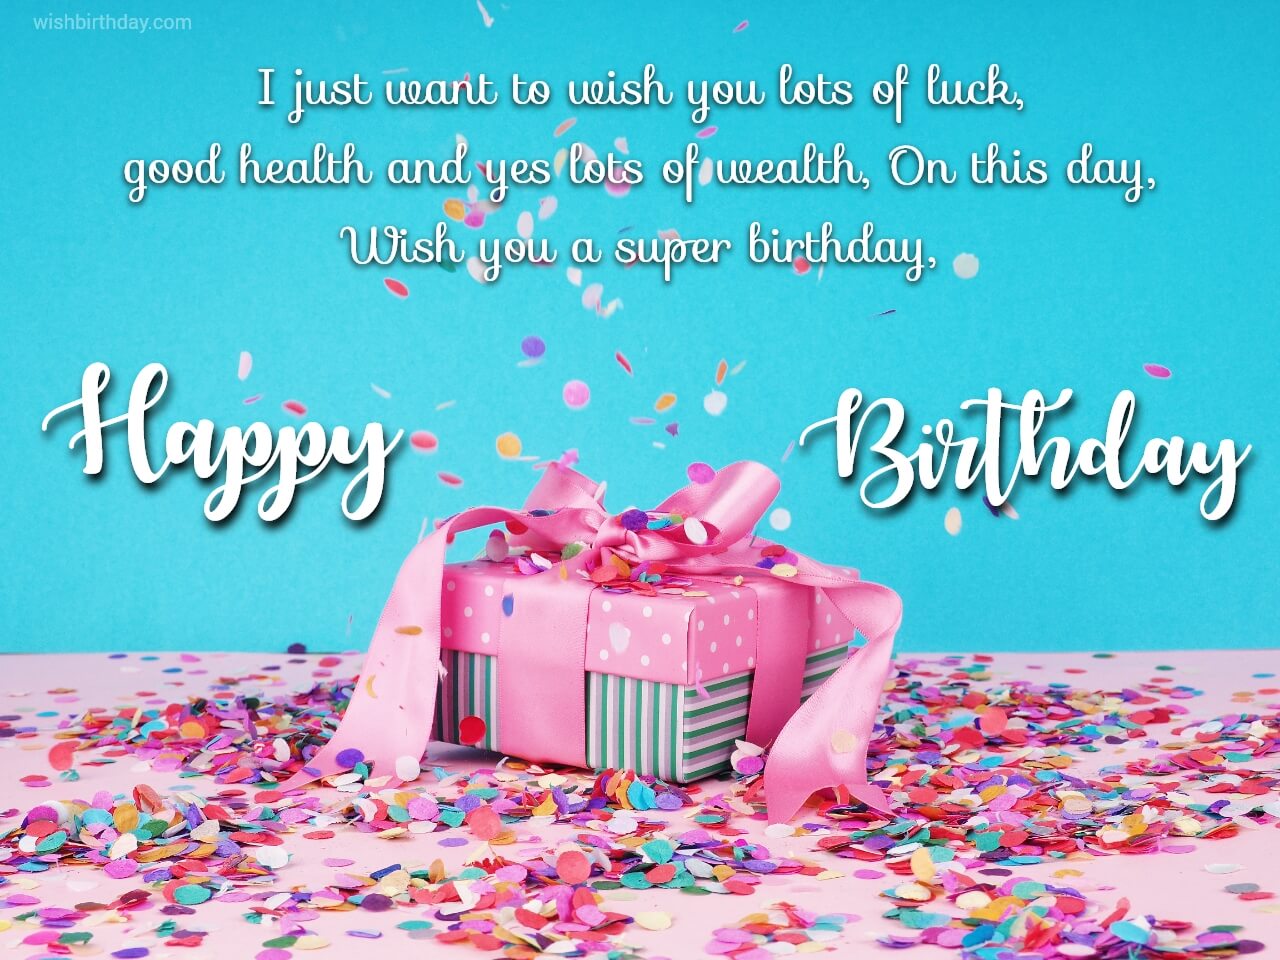 I Just Want To Wish You Lots Of Luck - Birthday Wishes, Happy Birthday ...